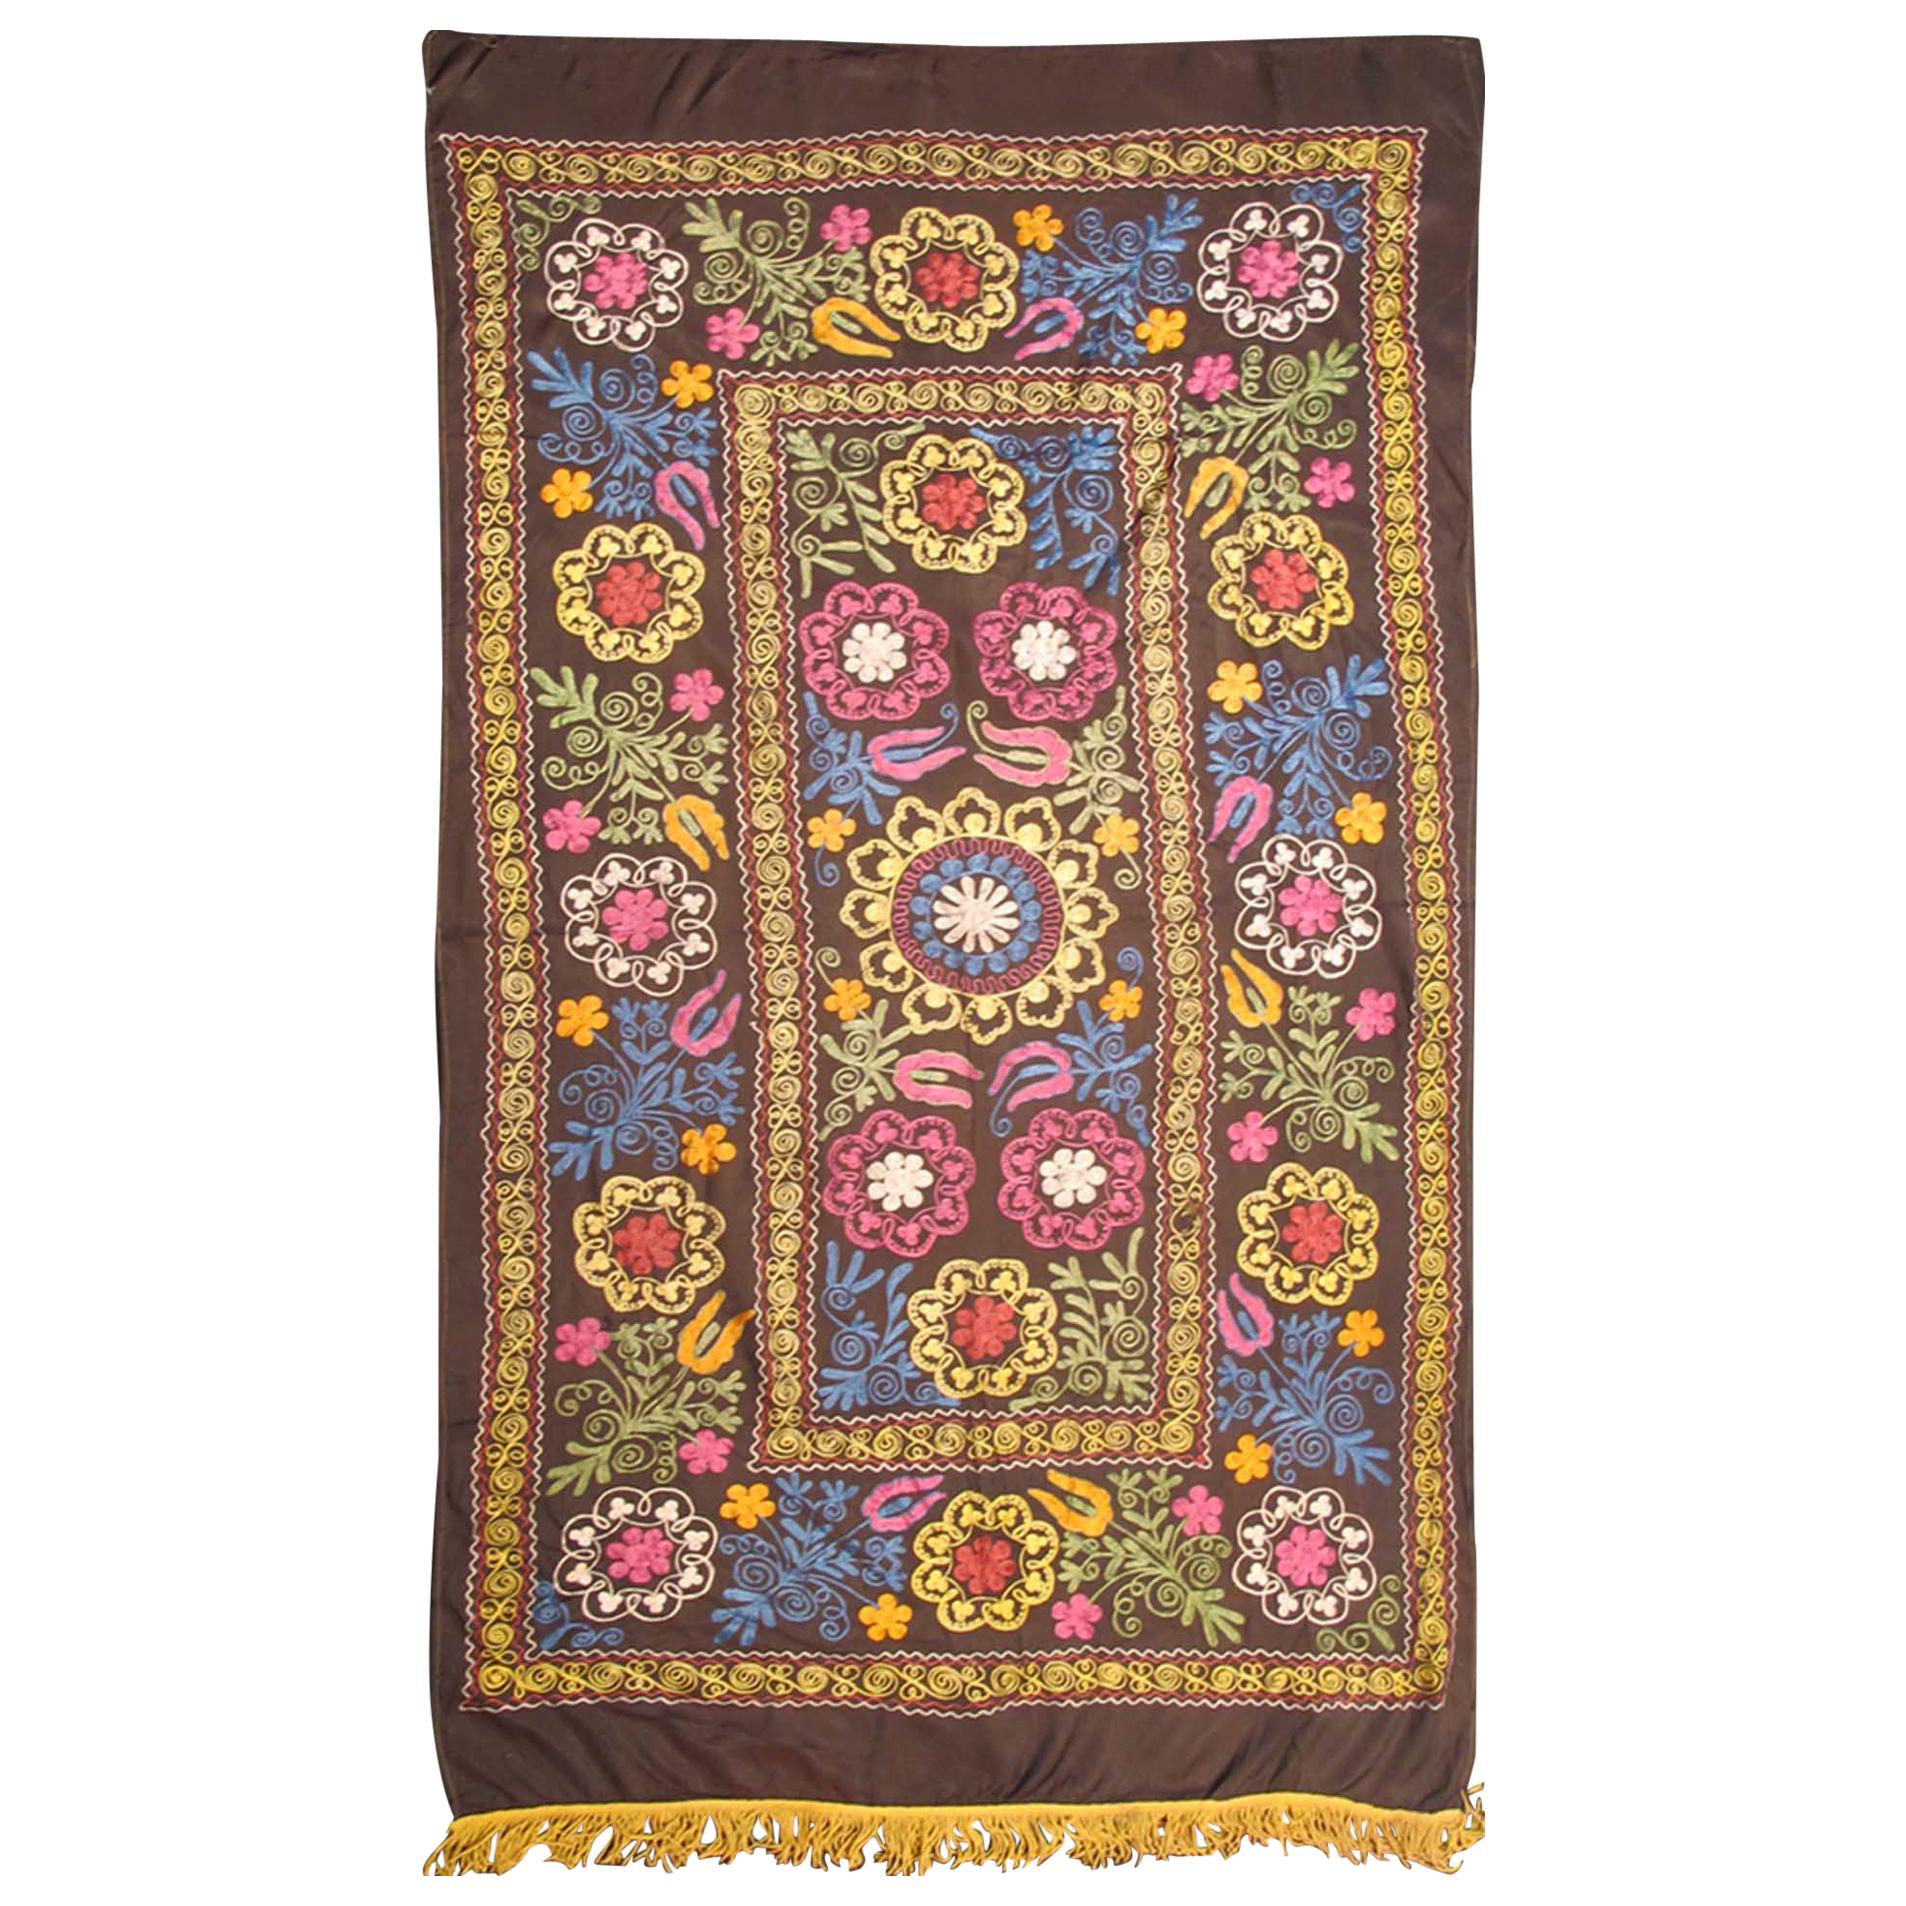 Embroidery Suzani with Floral Design and Beautiful Vivid Colors